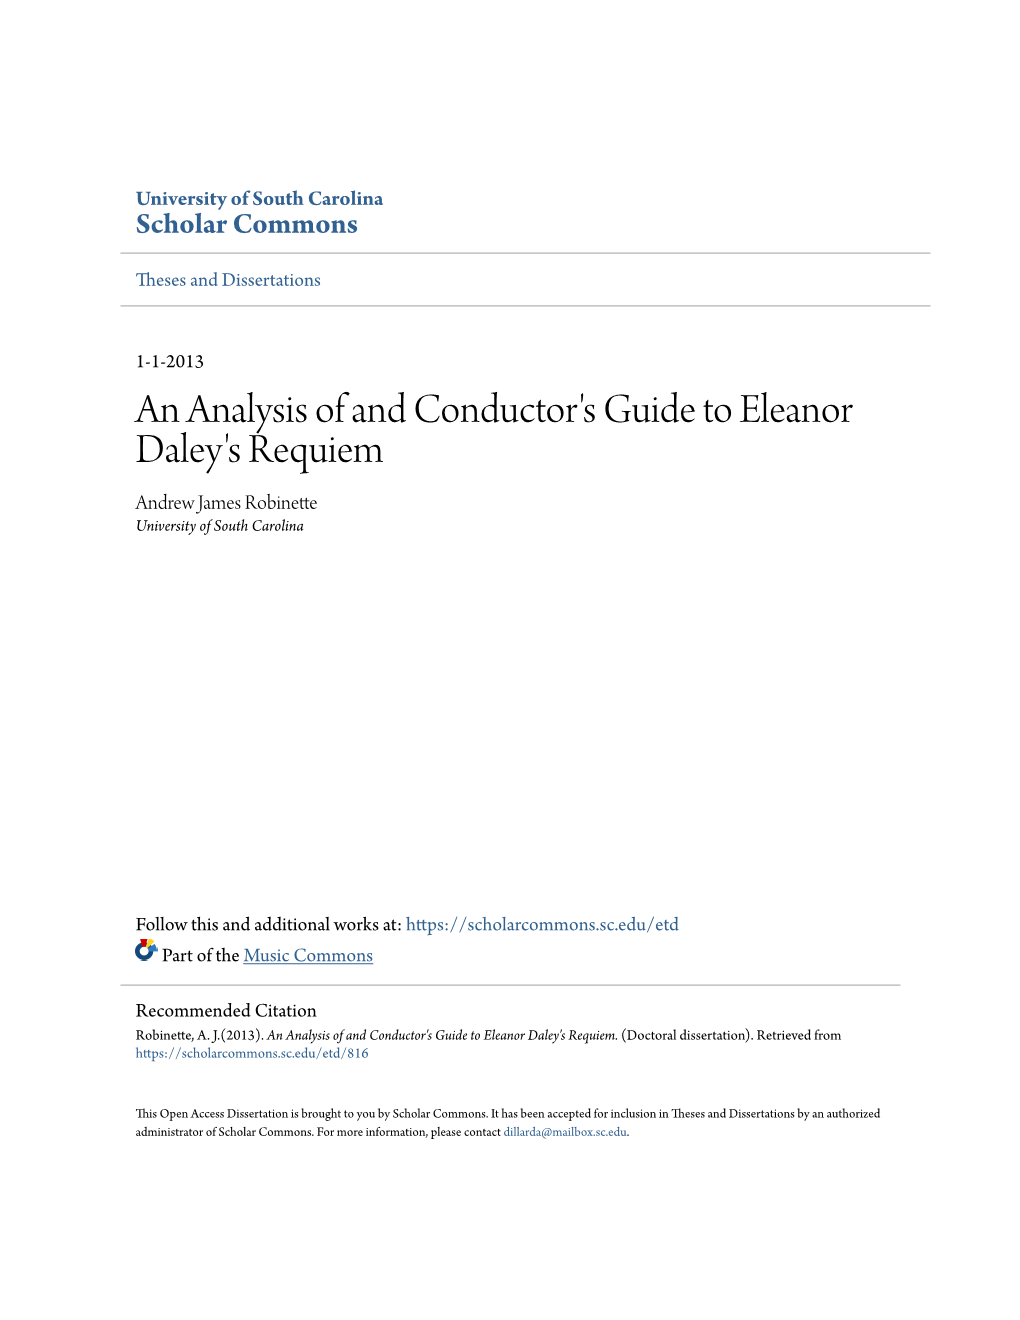 An Analysis of and Conductor's Guide to Eleanor Daley's Requiem Andrew James Robinette University of South Carolina